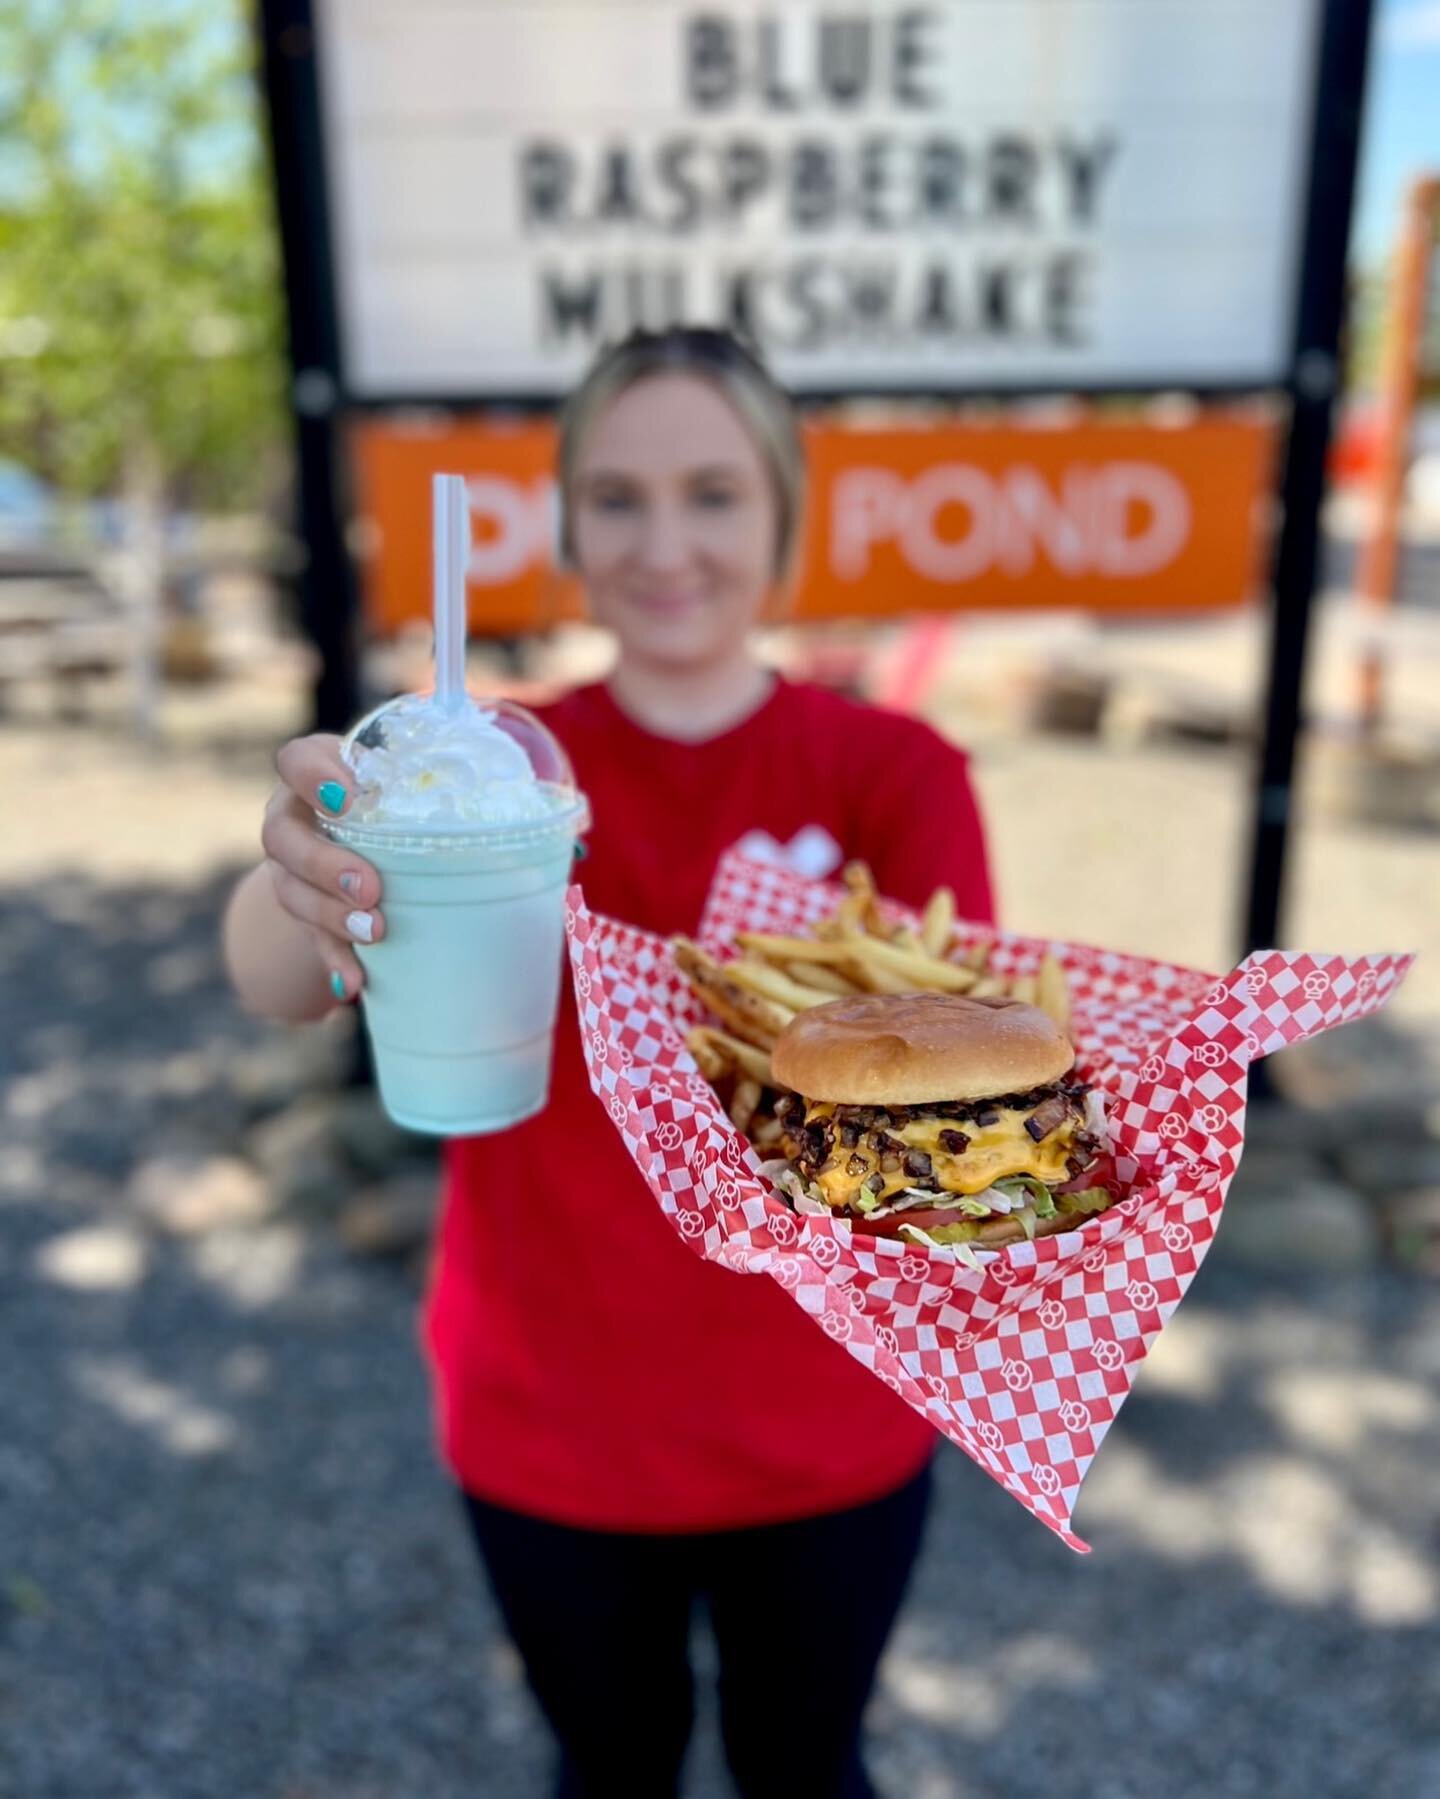 Perfect milkshake weather😬 Our May special is this delicious Blue Raspberry shake. A great addition to one of our grass-fed burgers! #milkshake #special #grassfed #burger #fries #lunch #dinner #🍔